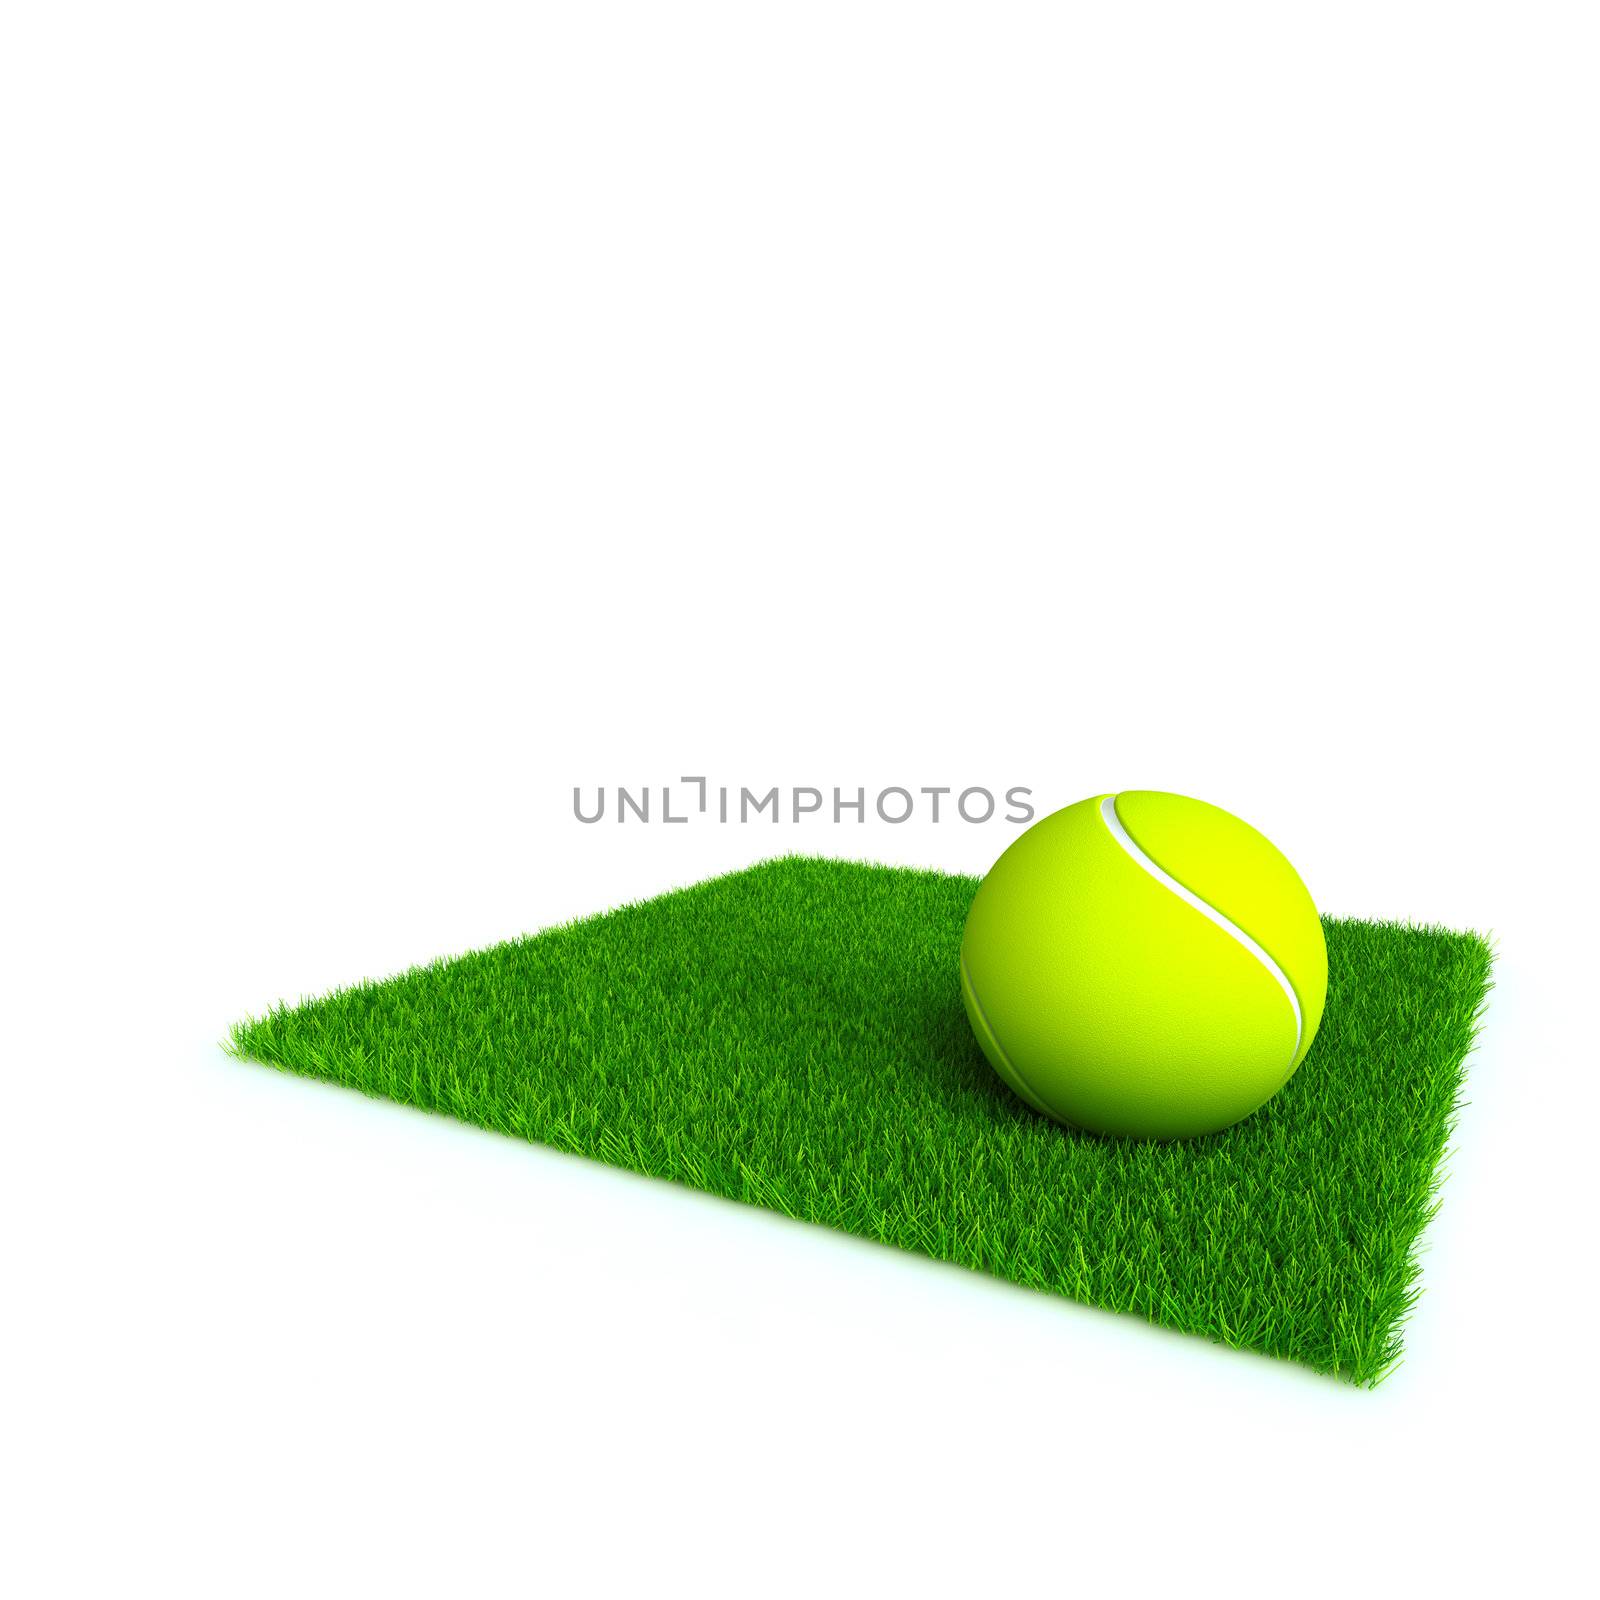 tennis ball on a lawn from a green bright grass on a white background